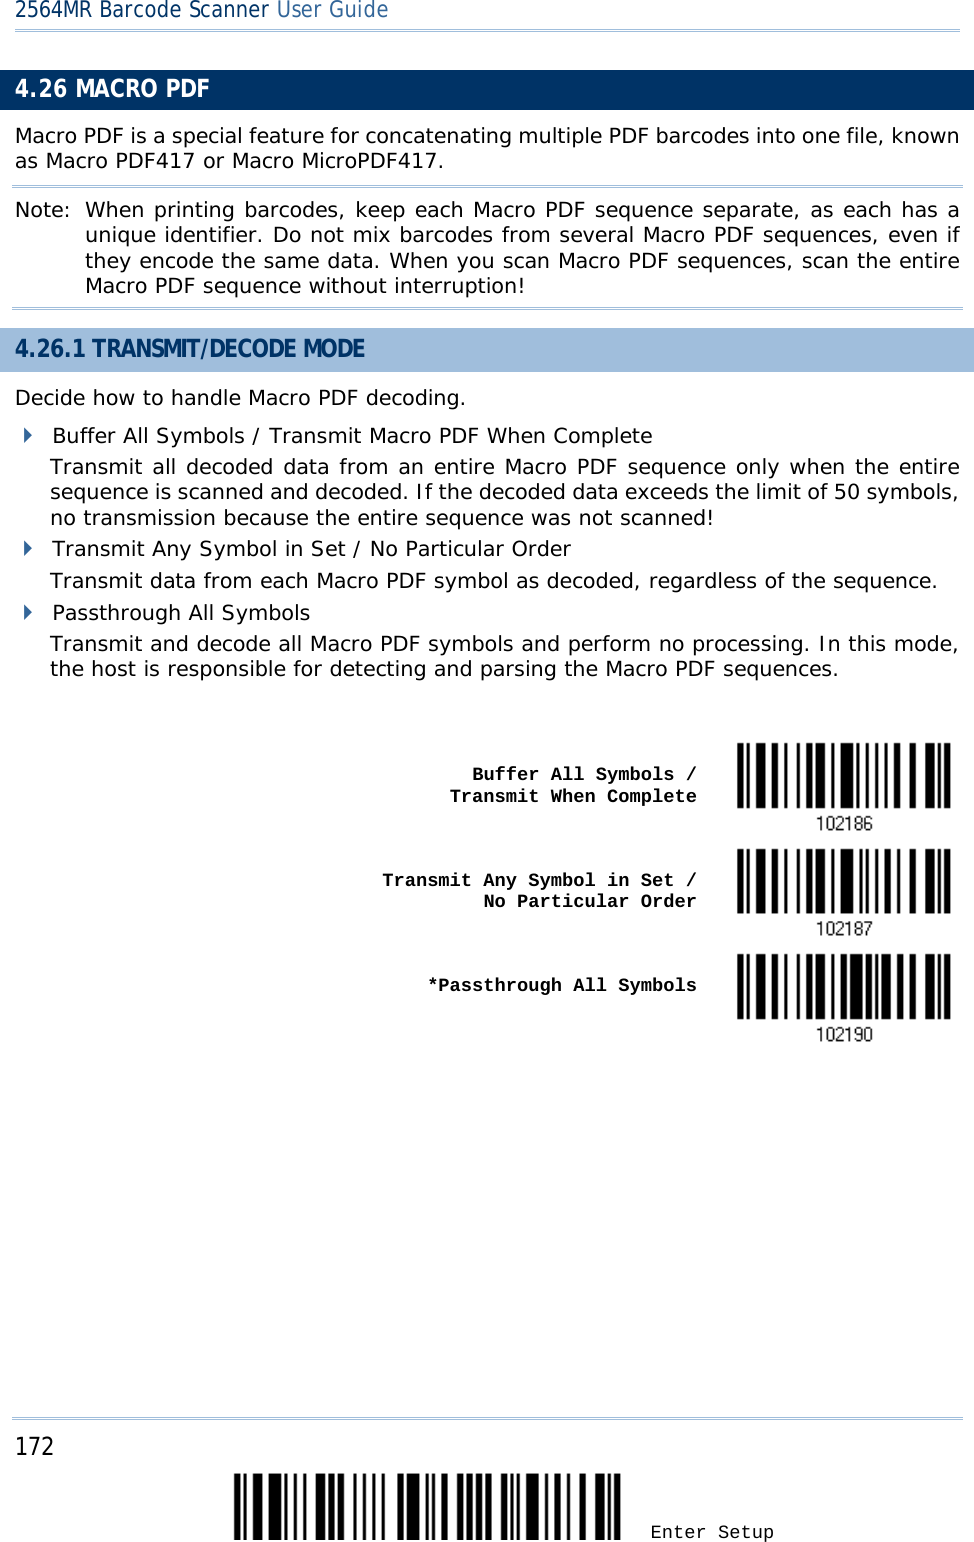 2564MR Barcode Scanner User Guide  4.26 MACRO PDF Macro PDF is a special feature for concatenating multiple PDF barcodes into one file, known as Macro PDF417 or Macro MicroPDF417. Note: When printing barcodes, keep each Macro PDF sequence separate, as each has a unique identifier. Do not mix barcodes from several Macro PDF sequences, even if they encode the same data. When you scan Macro PDF sequences, scan the entire Macro PDF sequence without interruption! 4.26.1 TRANSMIT/DECODE MODE Decide how to handle Macro PDF decoding.  Buffer All Symbols / Transmit Macro PDF When Complete Transmit all decoded data from an entire Macro PDF sequence only when the entire sequence is scanned and decoded. If the decoded data exceeds the limit of 50 symbols, no transmission because the entire sequence was not scanned!  Transmit Any Symbol in Set / No Particular Order Transmit data from each Macro PDF symbol as decoded, regardless of the sequence.  Passthrough All Symbols Transmit and decode all Macro PDF symbols and perform no processing. In this mode, the host is responsible for detecting and parsing the Macro PDF sequences.    Buffer All Symbols /                  Transmit When Complete    Transmit Any Symbol in Set /                 No Particular Order    *Passthrough All Symbols       172 Enter Setup 